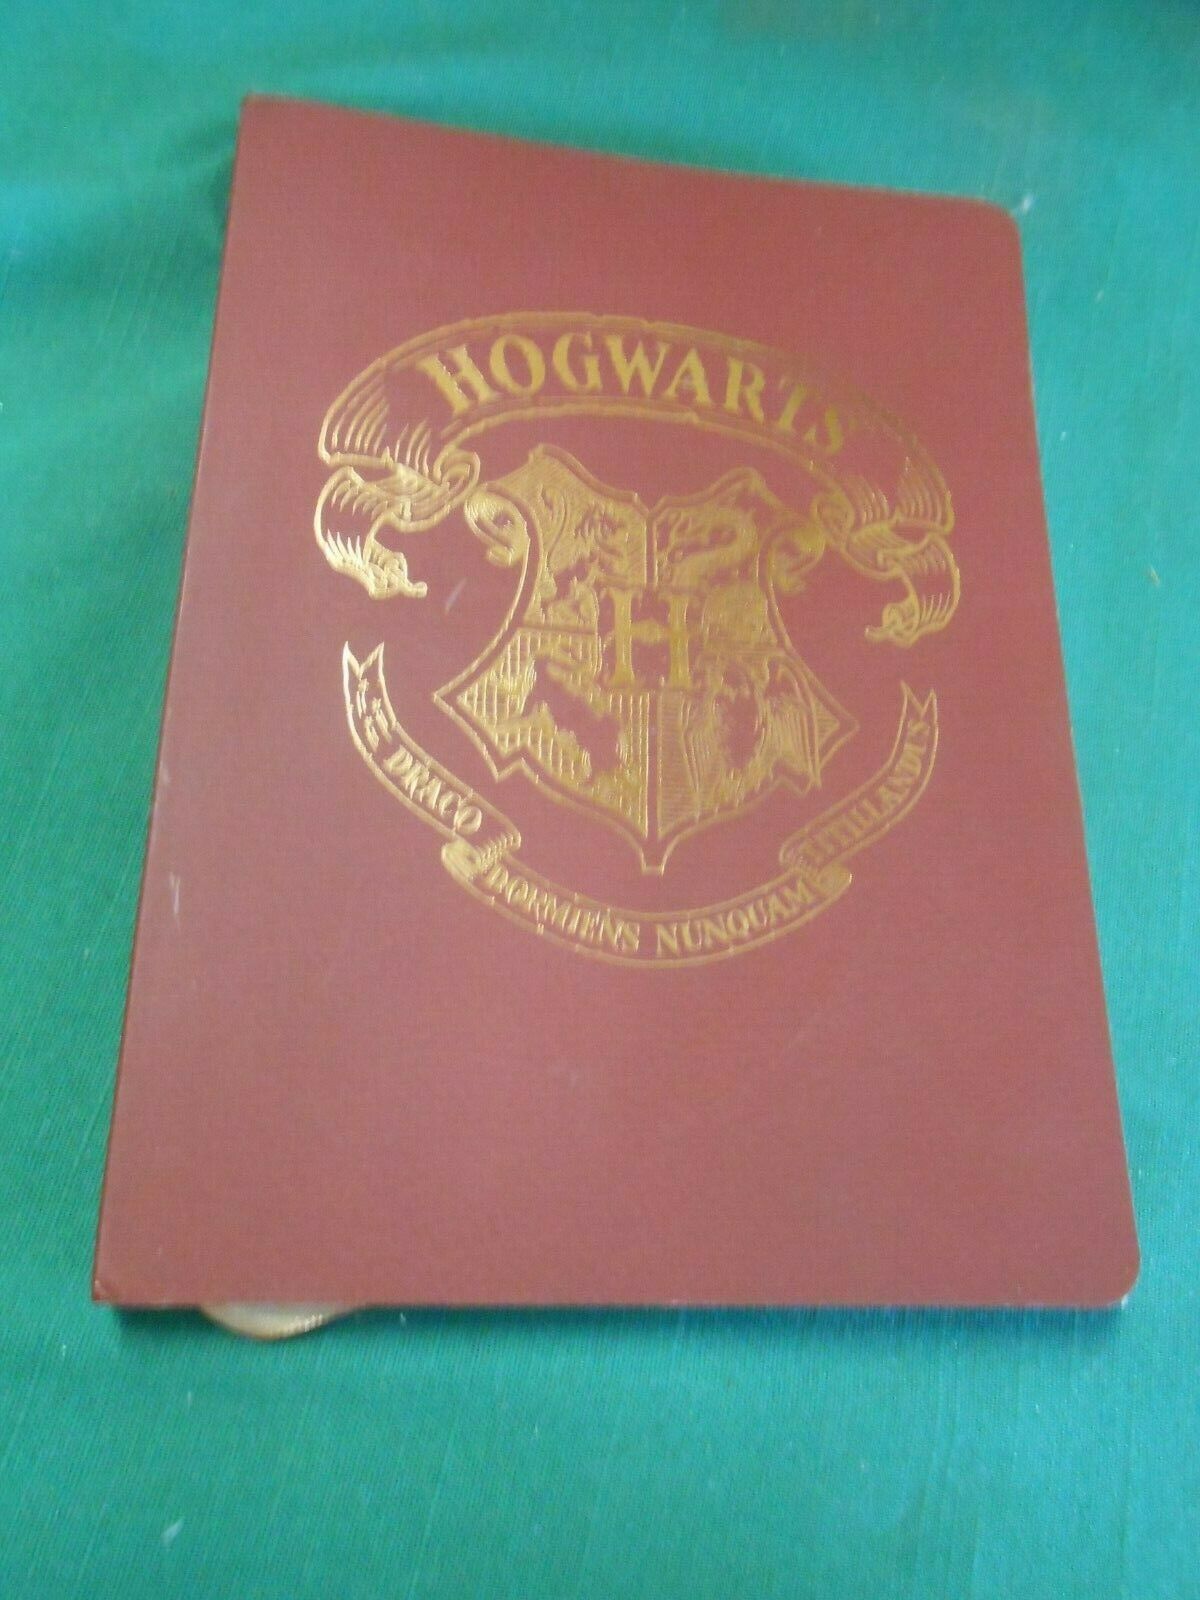 Great HOGWARTS "Harry Potter" DIARY BOOK...Never used - $10.48